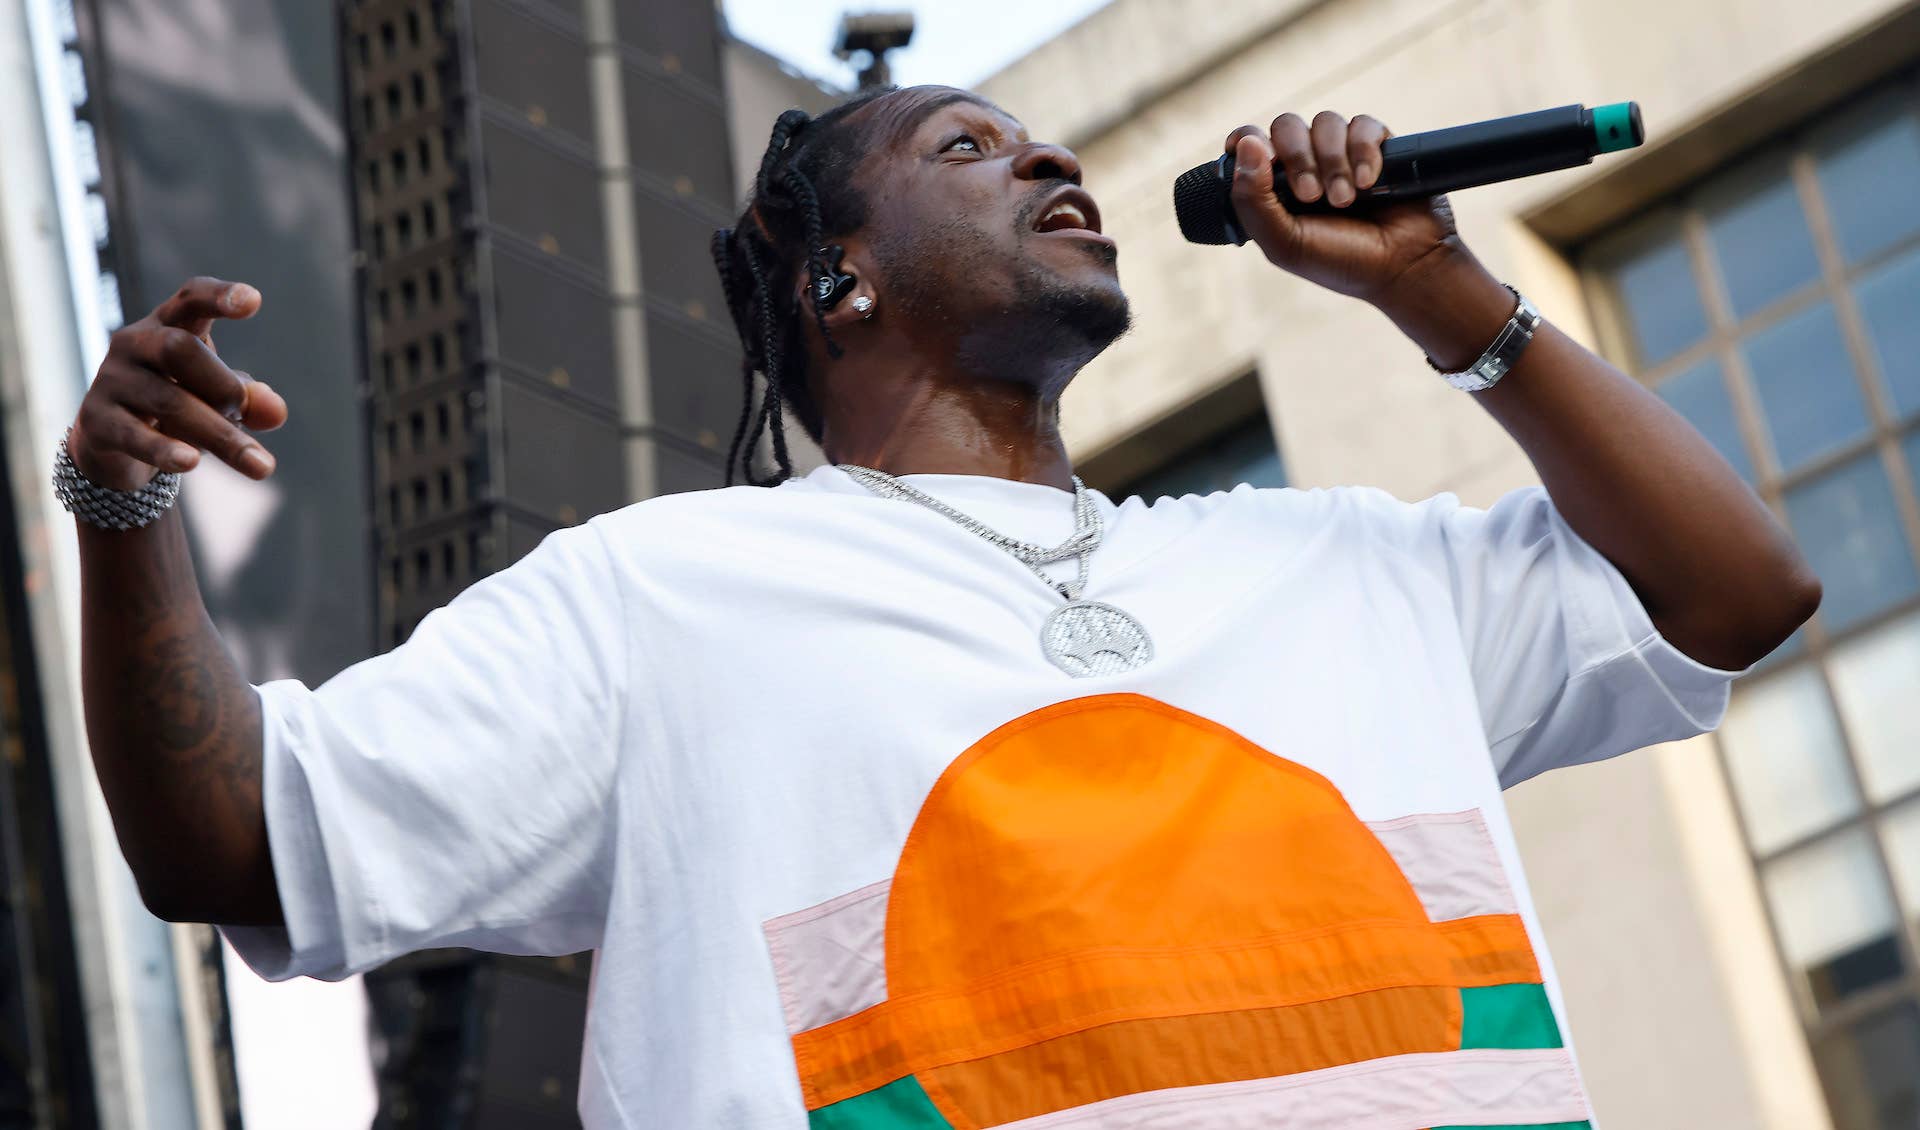 Pusha T performs at the Something In the Water Festival